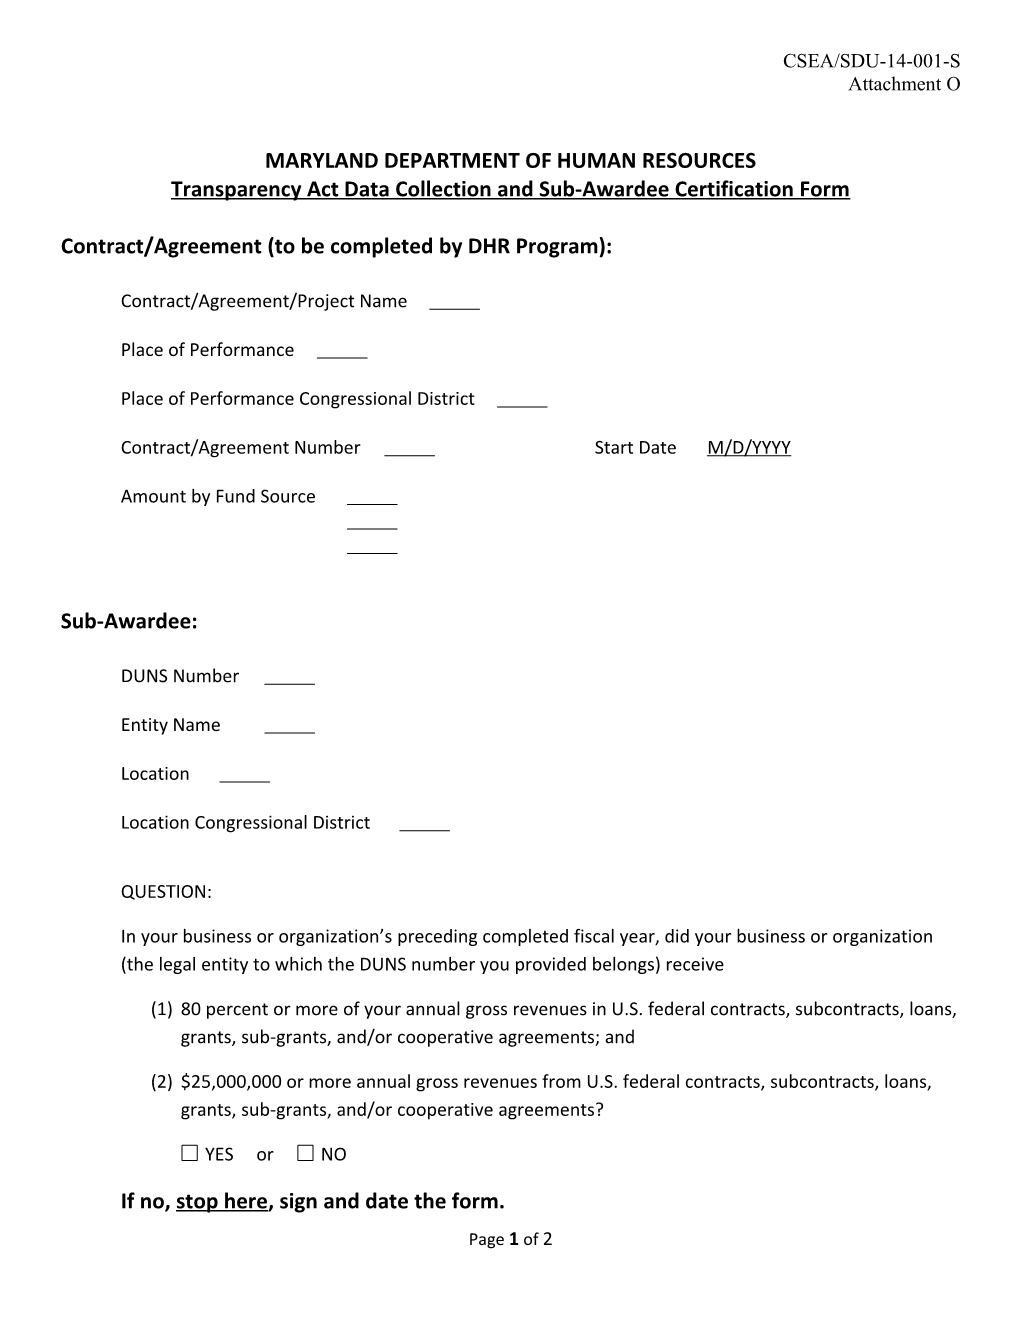 Transparency Act Data Collection and Sub-Awardee Certification Form